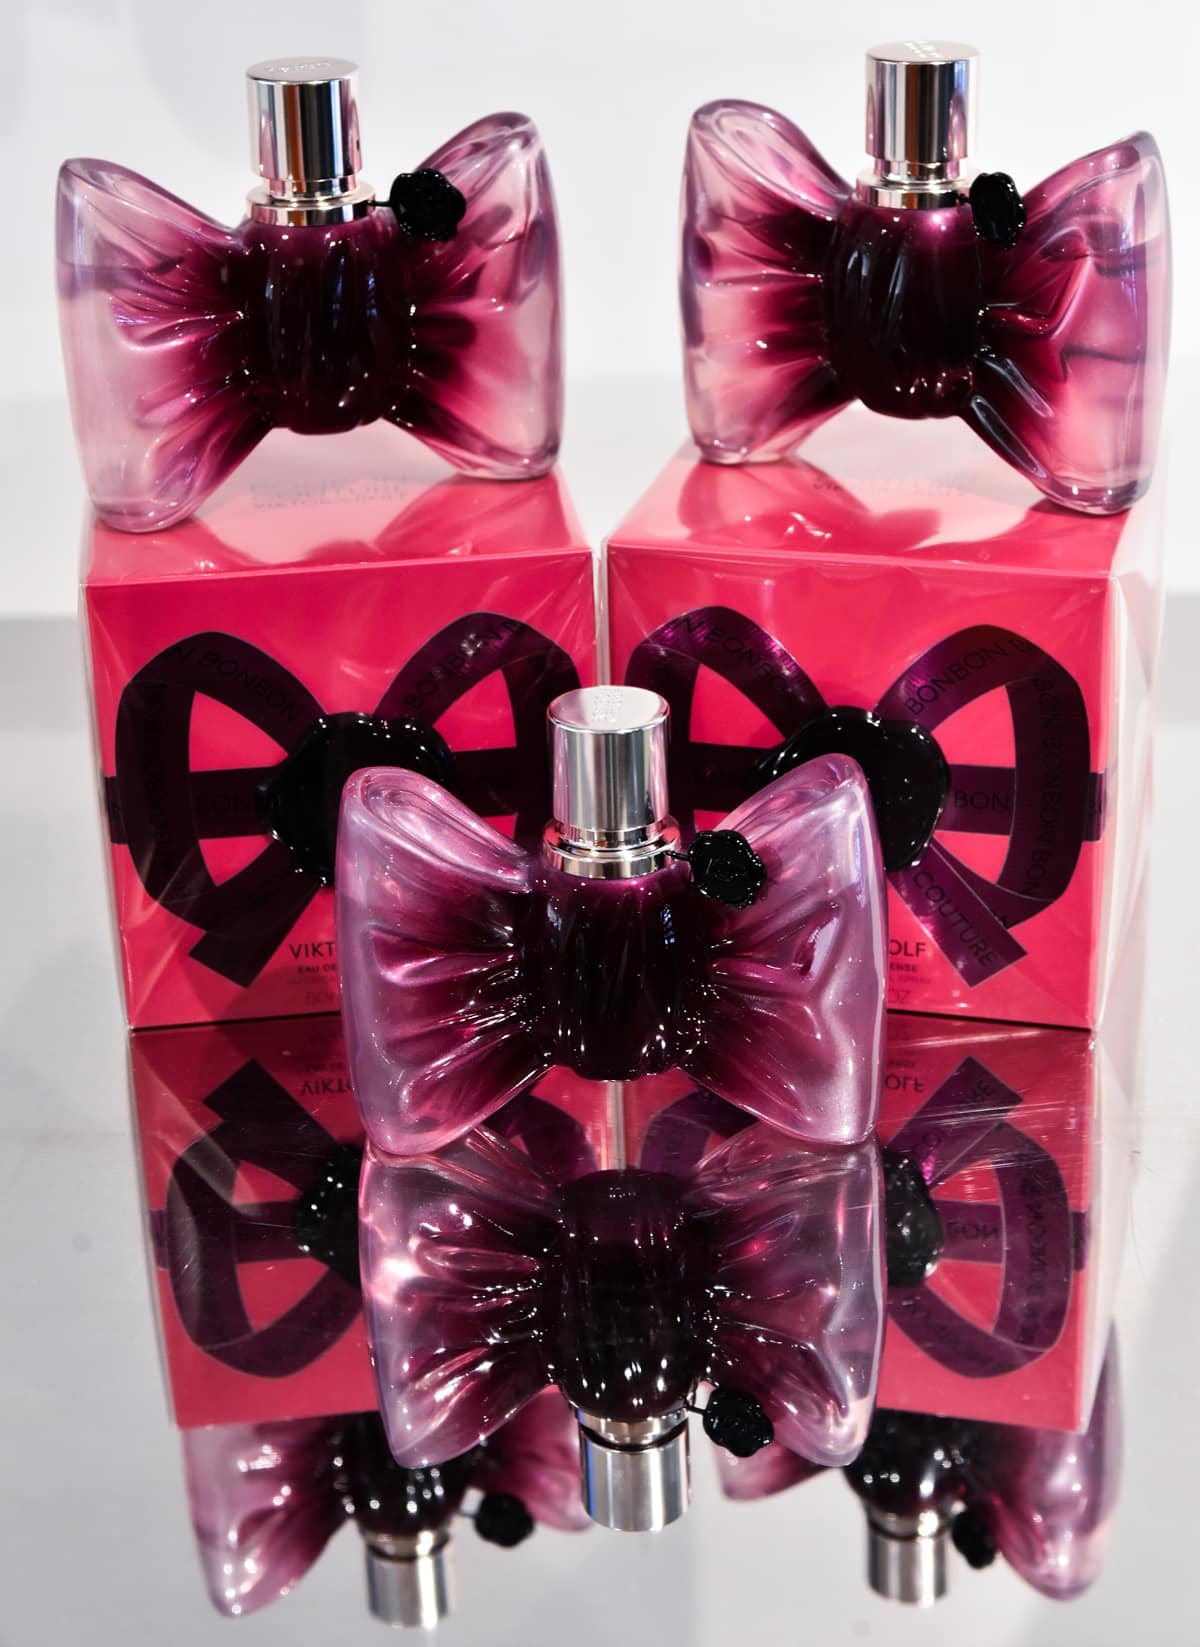 Bonbon by Viktor & Rolf is a women's floral fruity gourmand fragrance that was launched in 2014